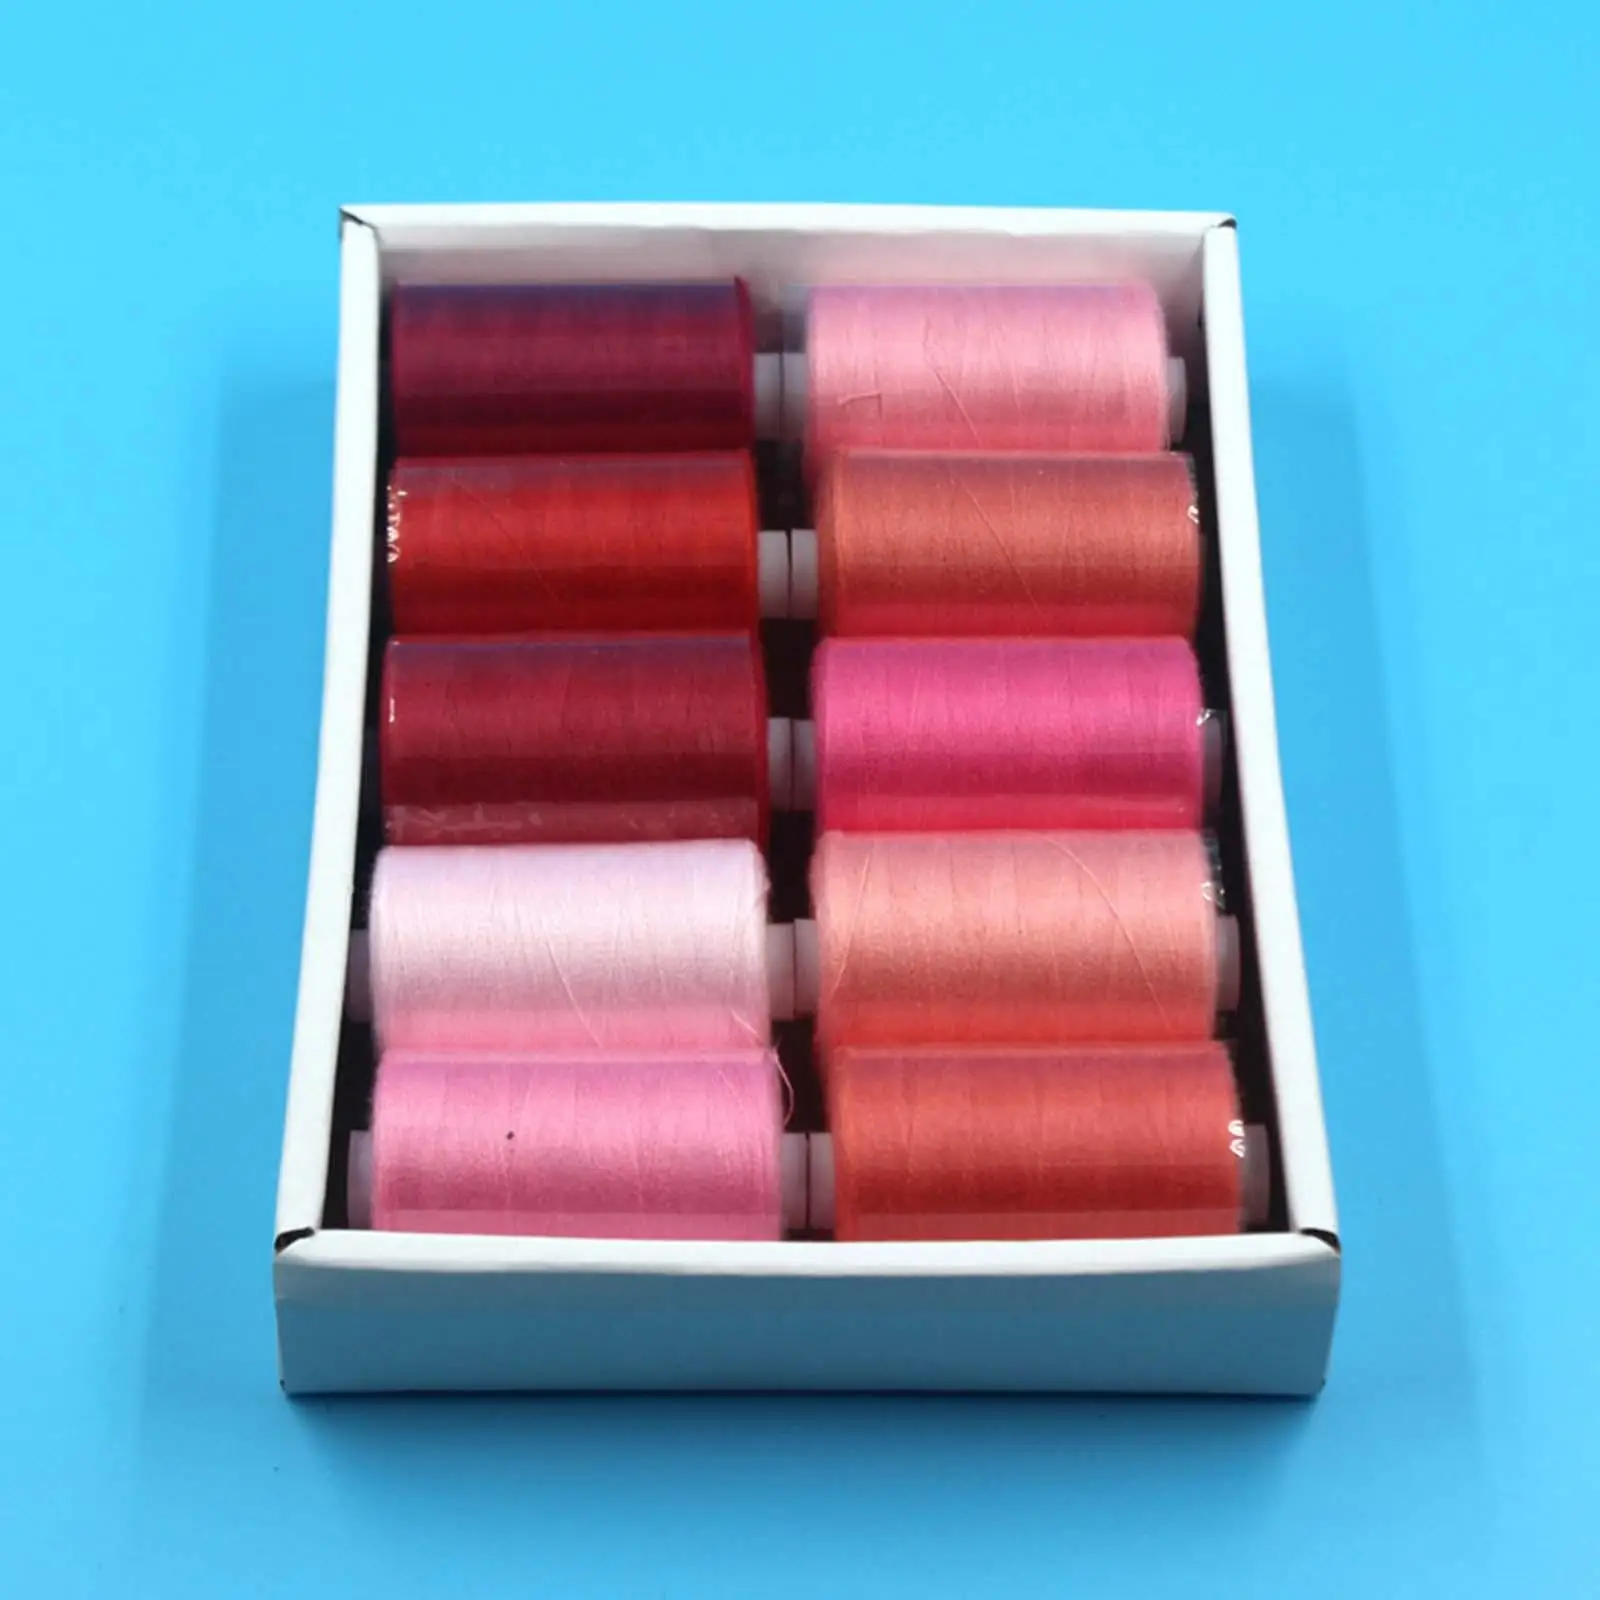 Pack of 10 Spools Sewing Thread Assorted Color Polyester Sewing Thread Kit Set Great for Quilting Stitching/Hand Sewing